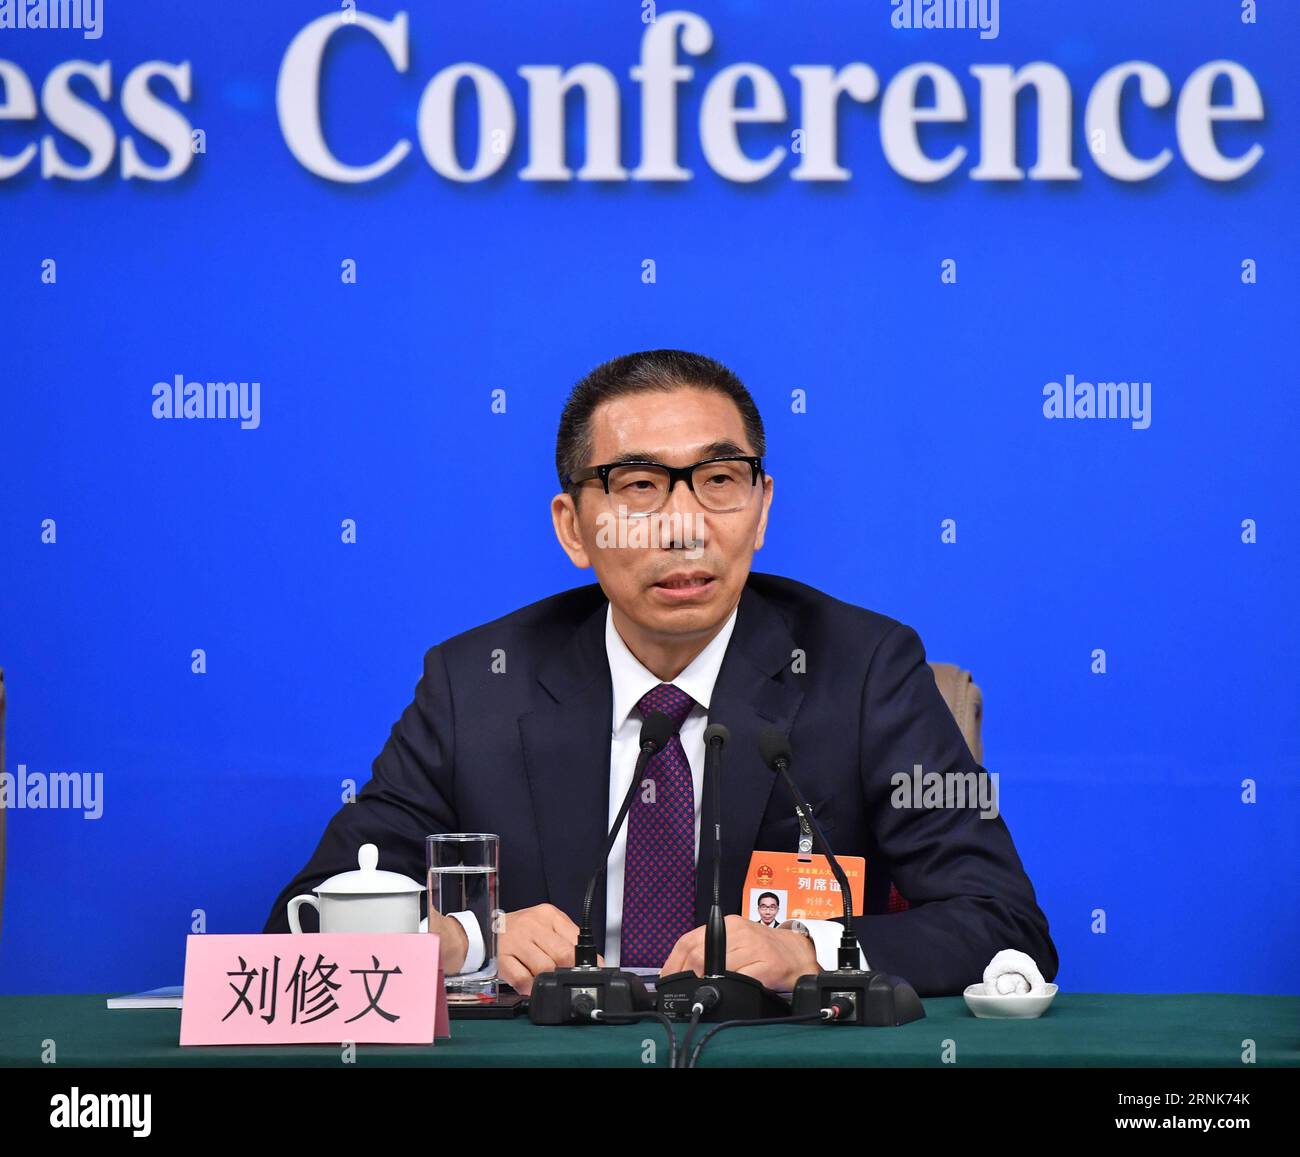 (170310) -- BEIJING, March 10, 2017 -- Liu Xiuwen, deputy director of the Budgetary Affairs Commission of the National People s Congress (NPC) Standing Committee, answers questions on the NPC s supervisory work at a press conference for the fifth session of the 12th NPC in Beijing, capital of China, March 10, 2017. ) (zhs) (TWO SESSIONS)CHINA-BEIJING-NPC-PRESS CONFERENCE-SUPERVISORY WORK (CN) LixXin PUBLICATIONxNOTxINxCHN   Beijing March 10 2017 Liu Xiuwen Deputy Director of The Budgetary Affairs Commission of The National Celebrities S Congress NPC thing Committee Answers Questions ON The NPC Stock Photo